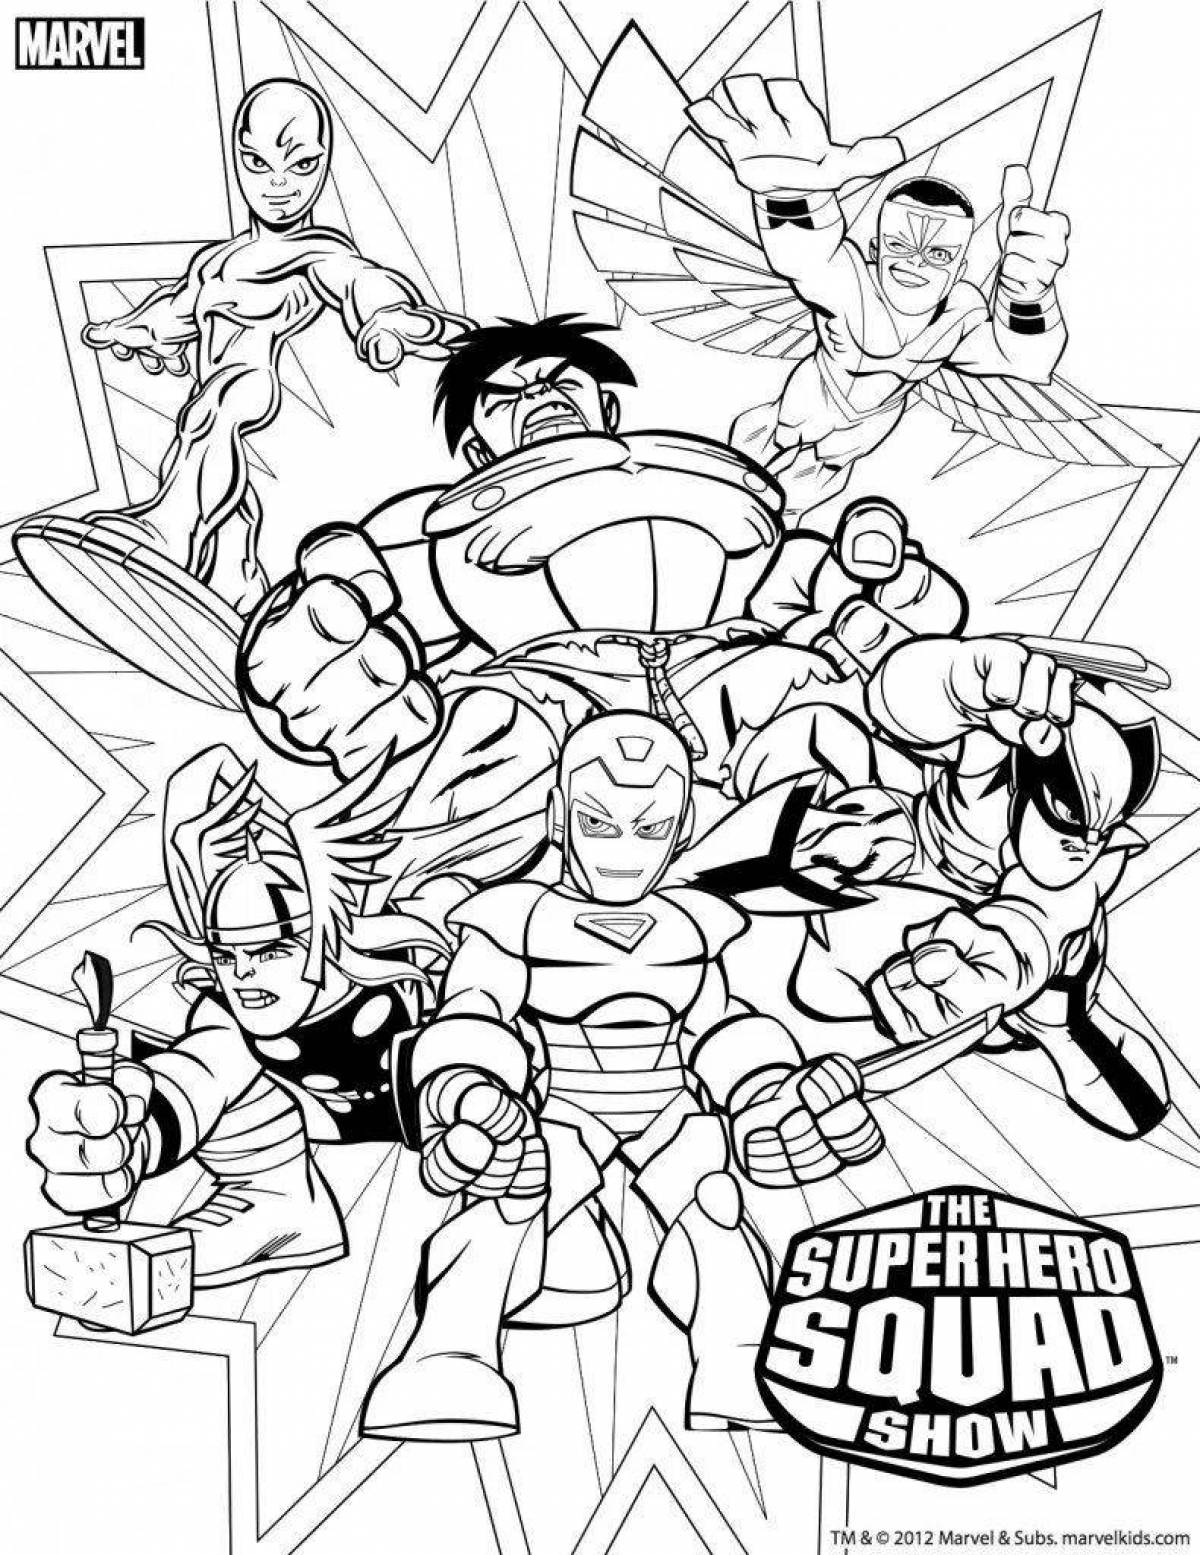 Attractive marvel superheroes coloring book for boys